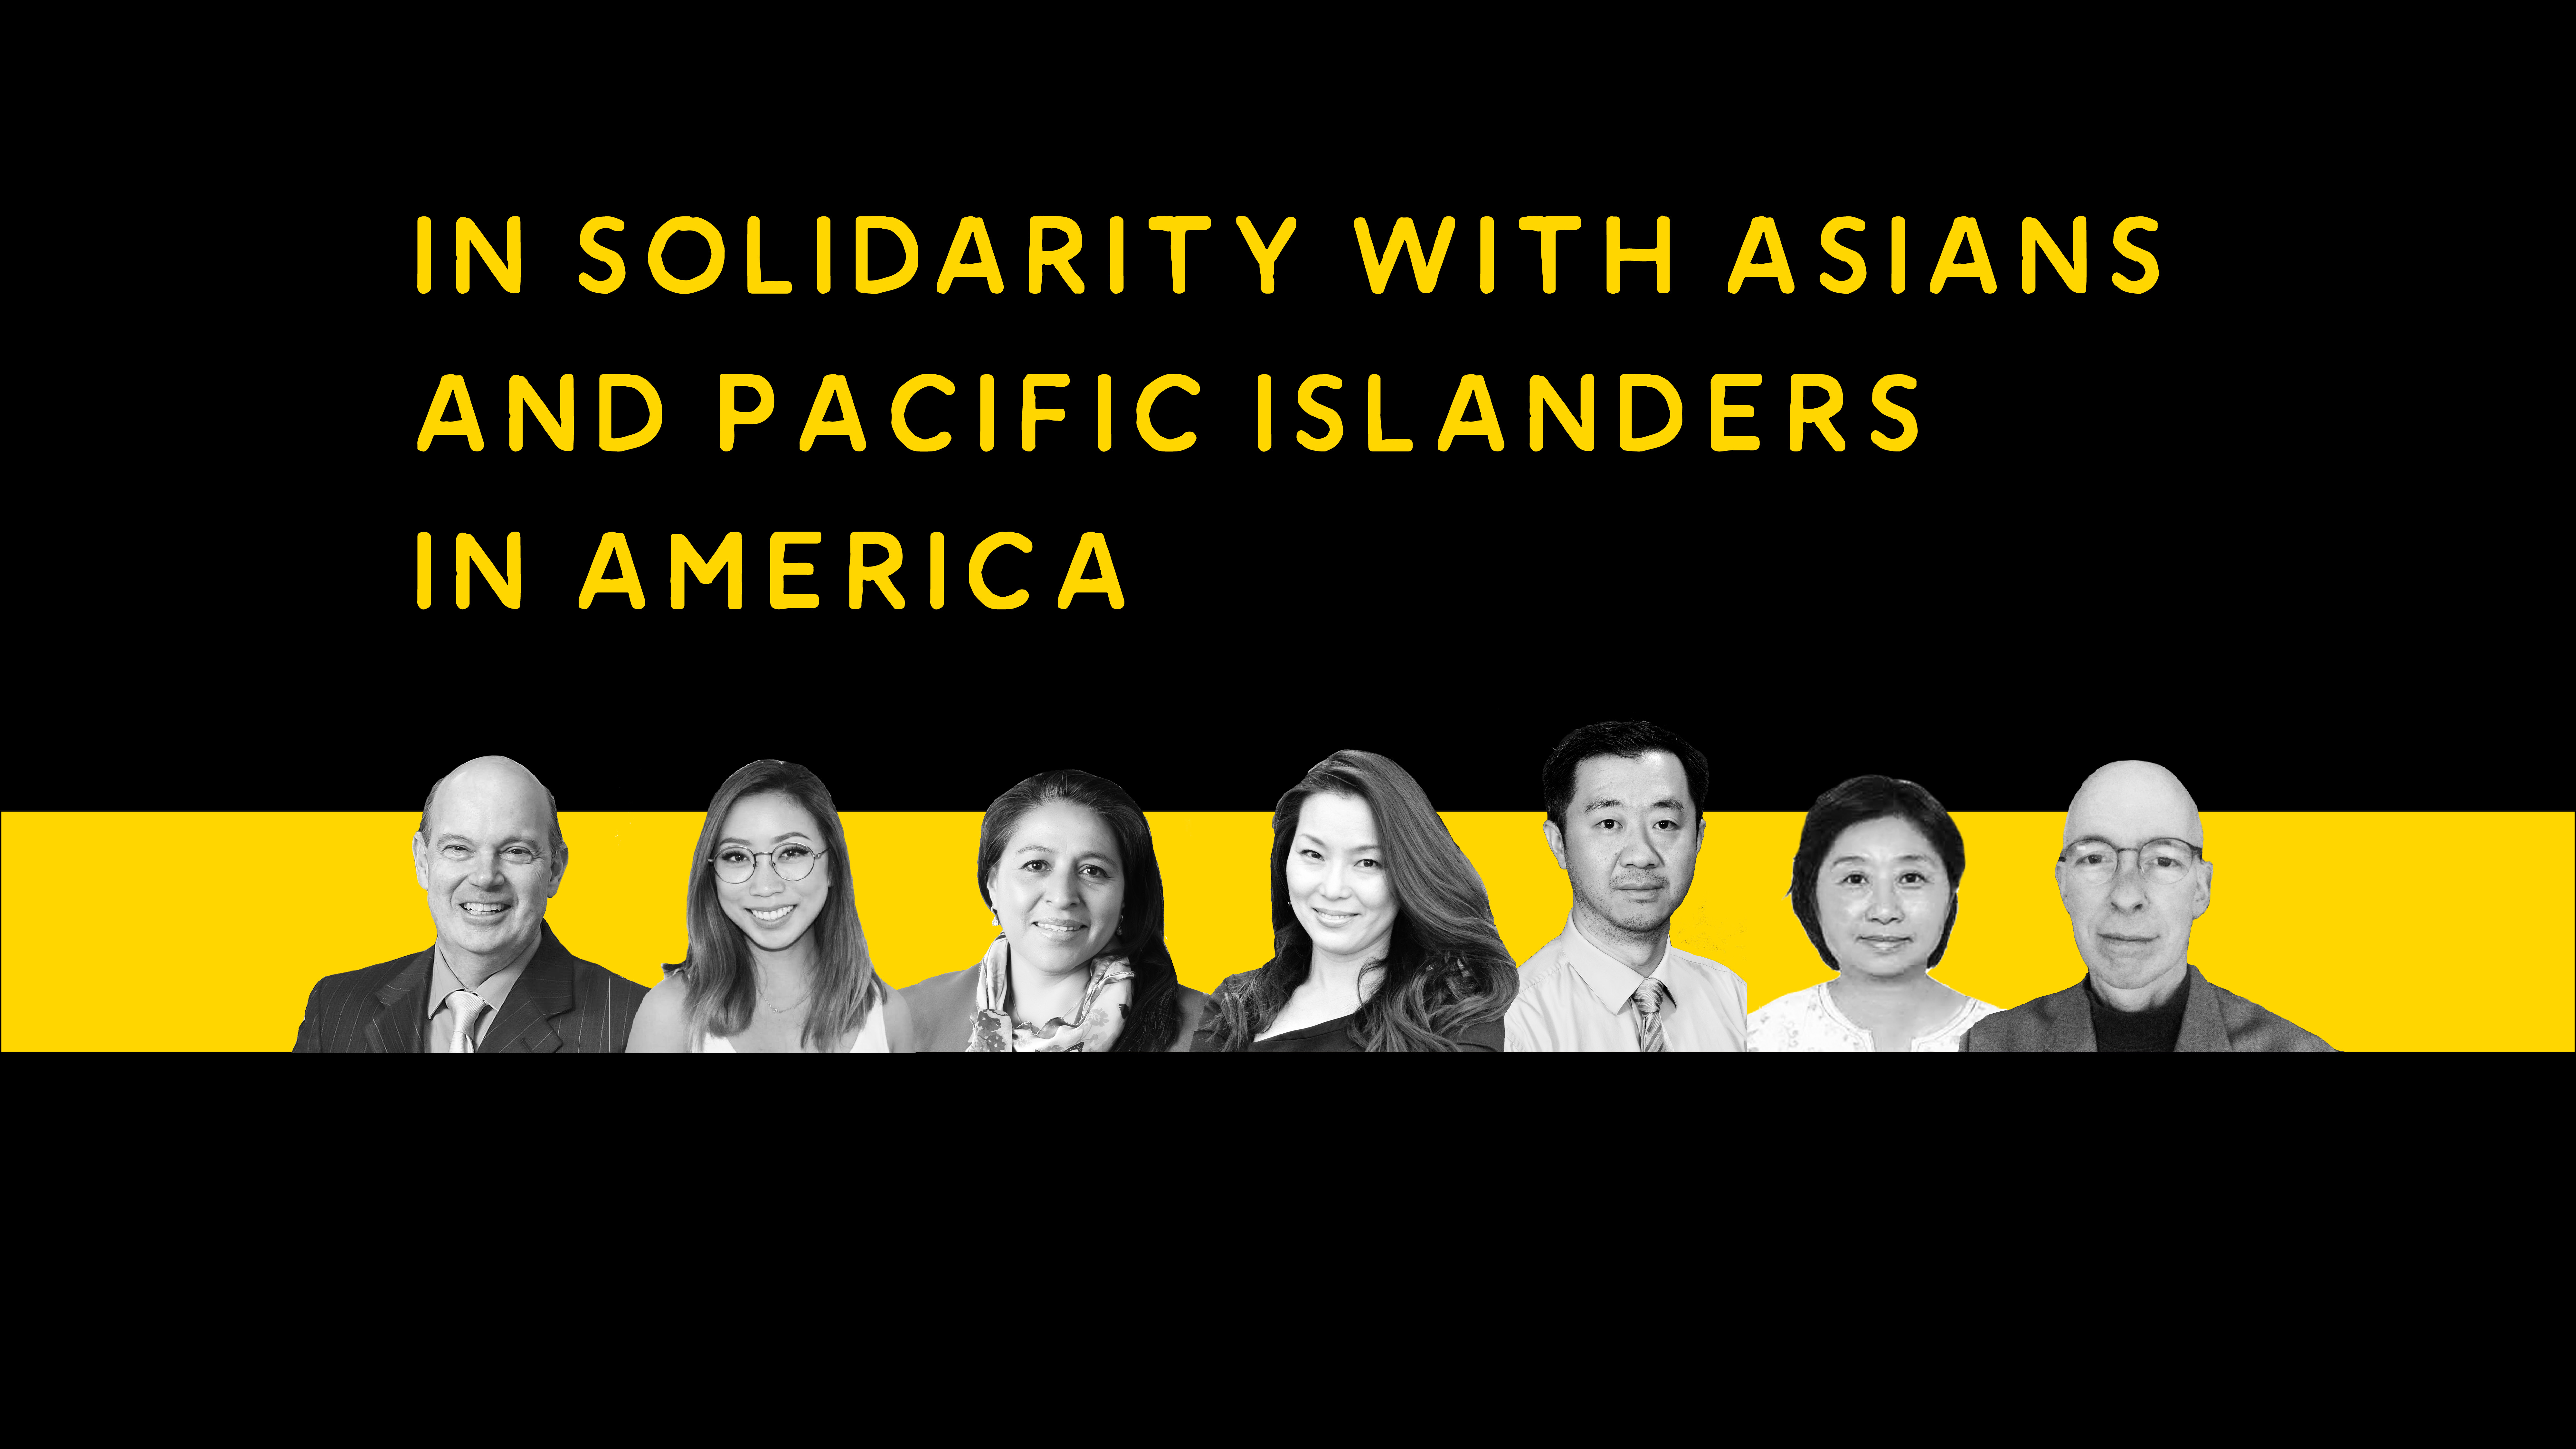 Event promotion image for webinar titled In Solidarity with Asians and Pacific Islanders in America